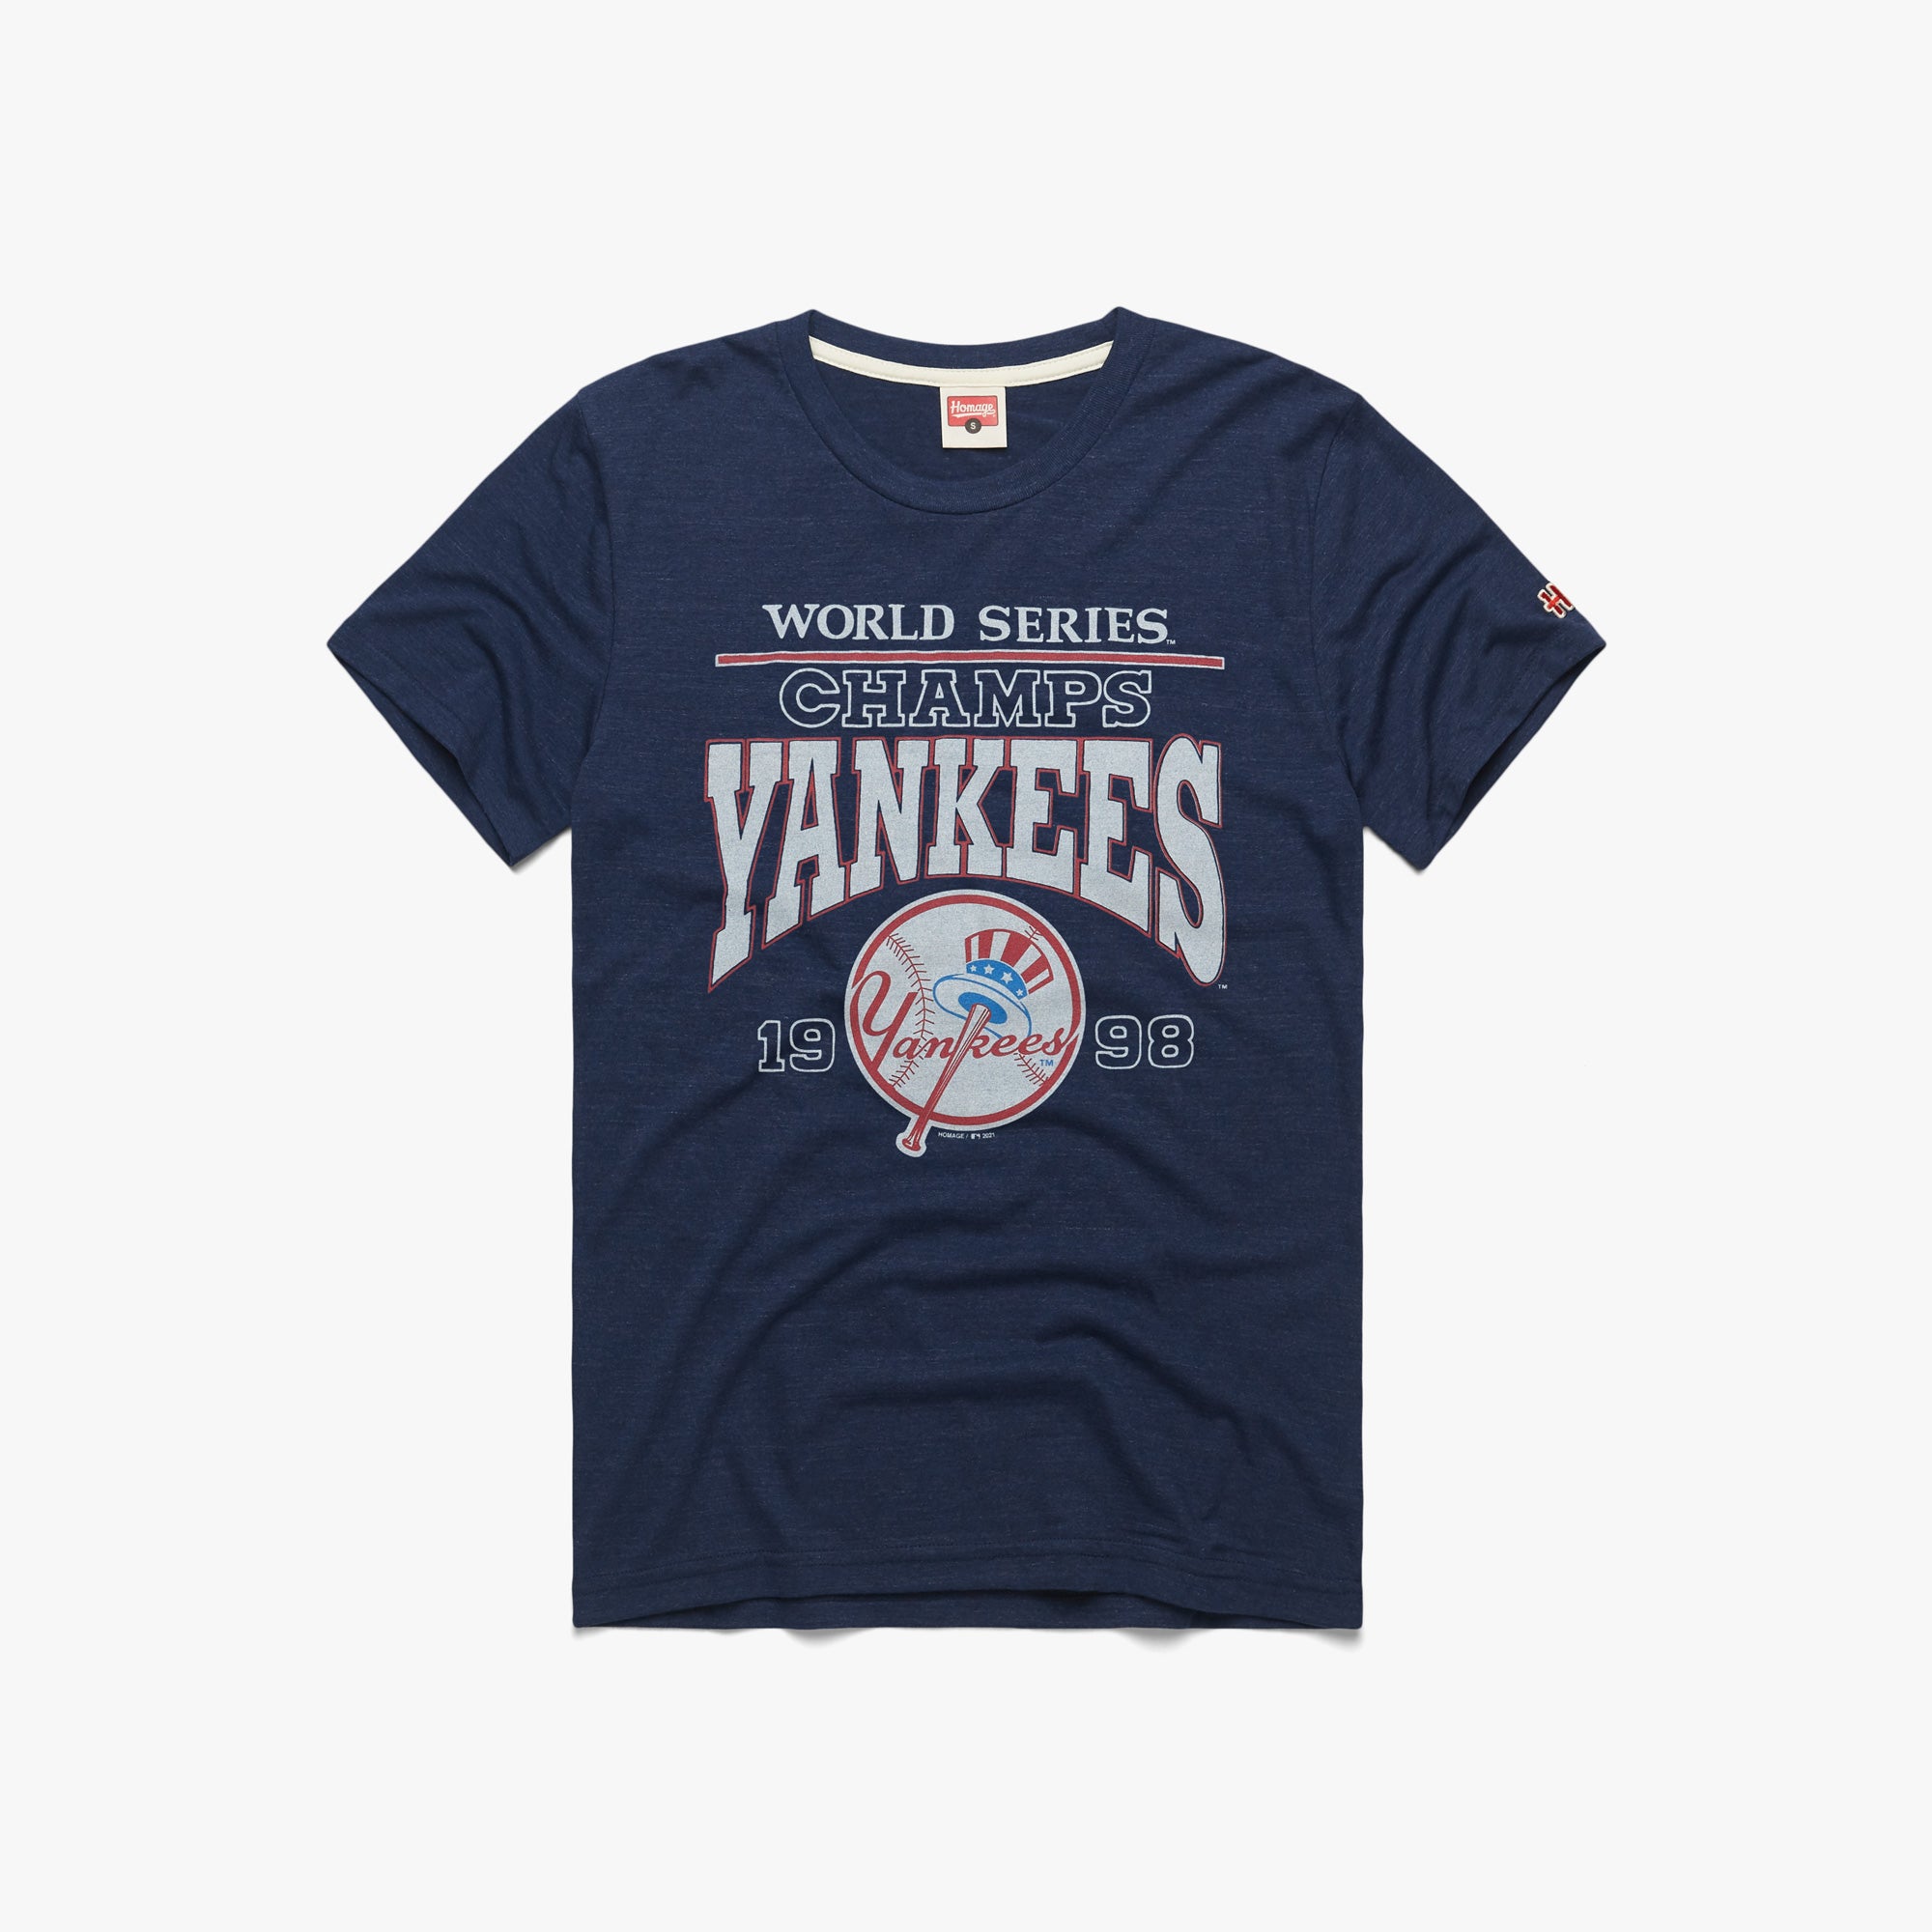 New York Yankees Vintage 90s Champions T-Shirt - Pro Player White Tee - MLB  Baseball - Official Clubhouse Shirt - Size XL - Free SHIPPING